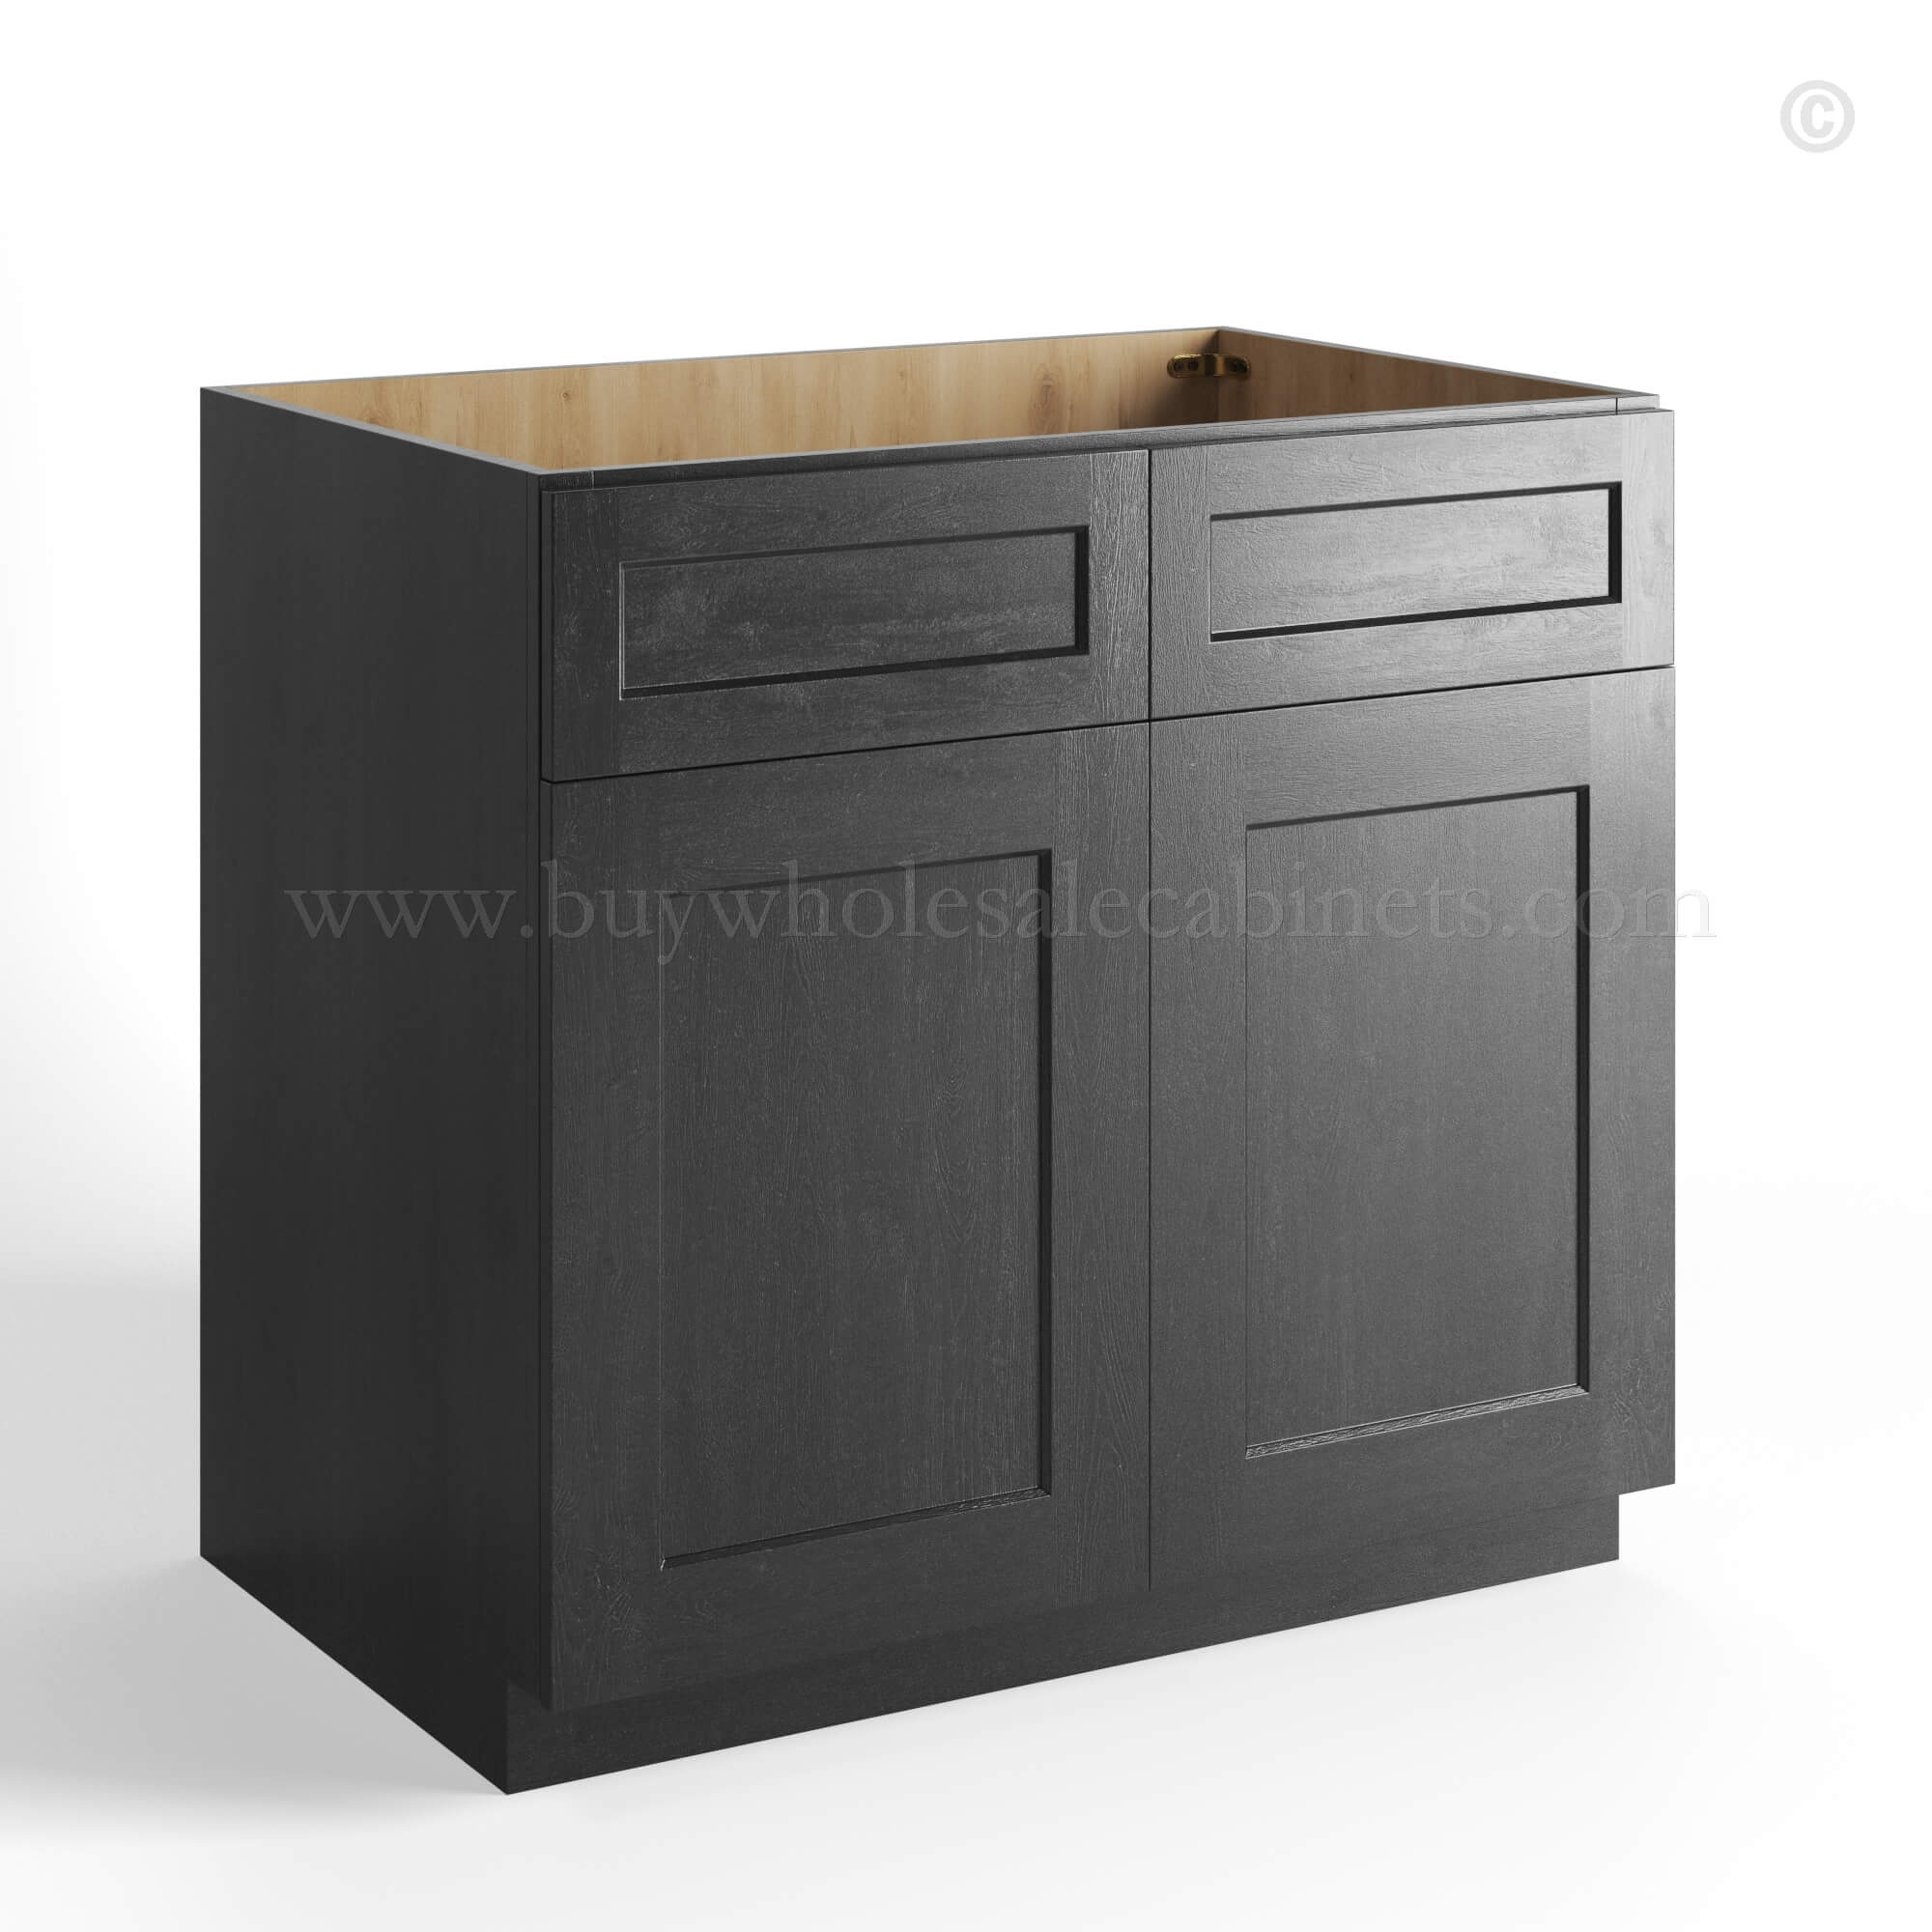 Charcoal Black Shaker Sink Base Double Door & Double Drawer, rta cabinets, wholesale cabinets